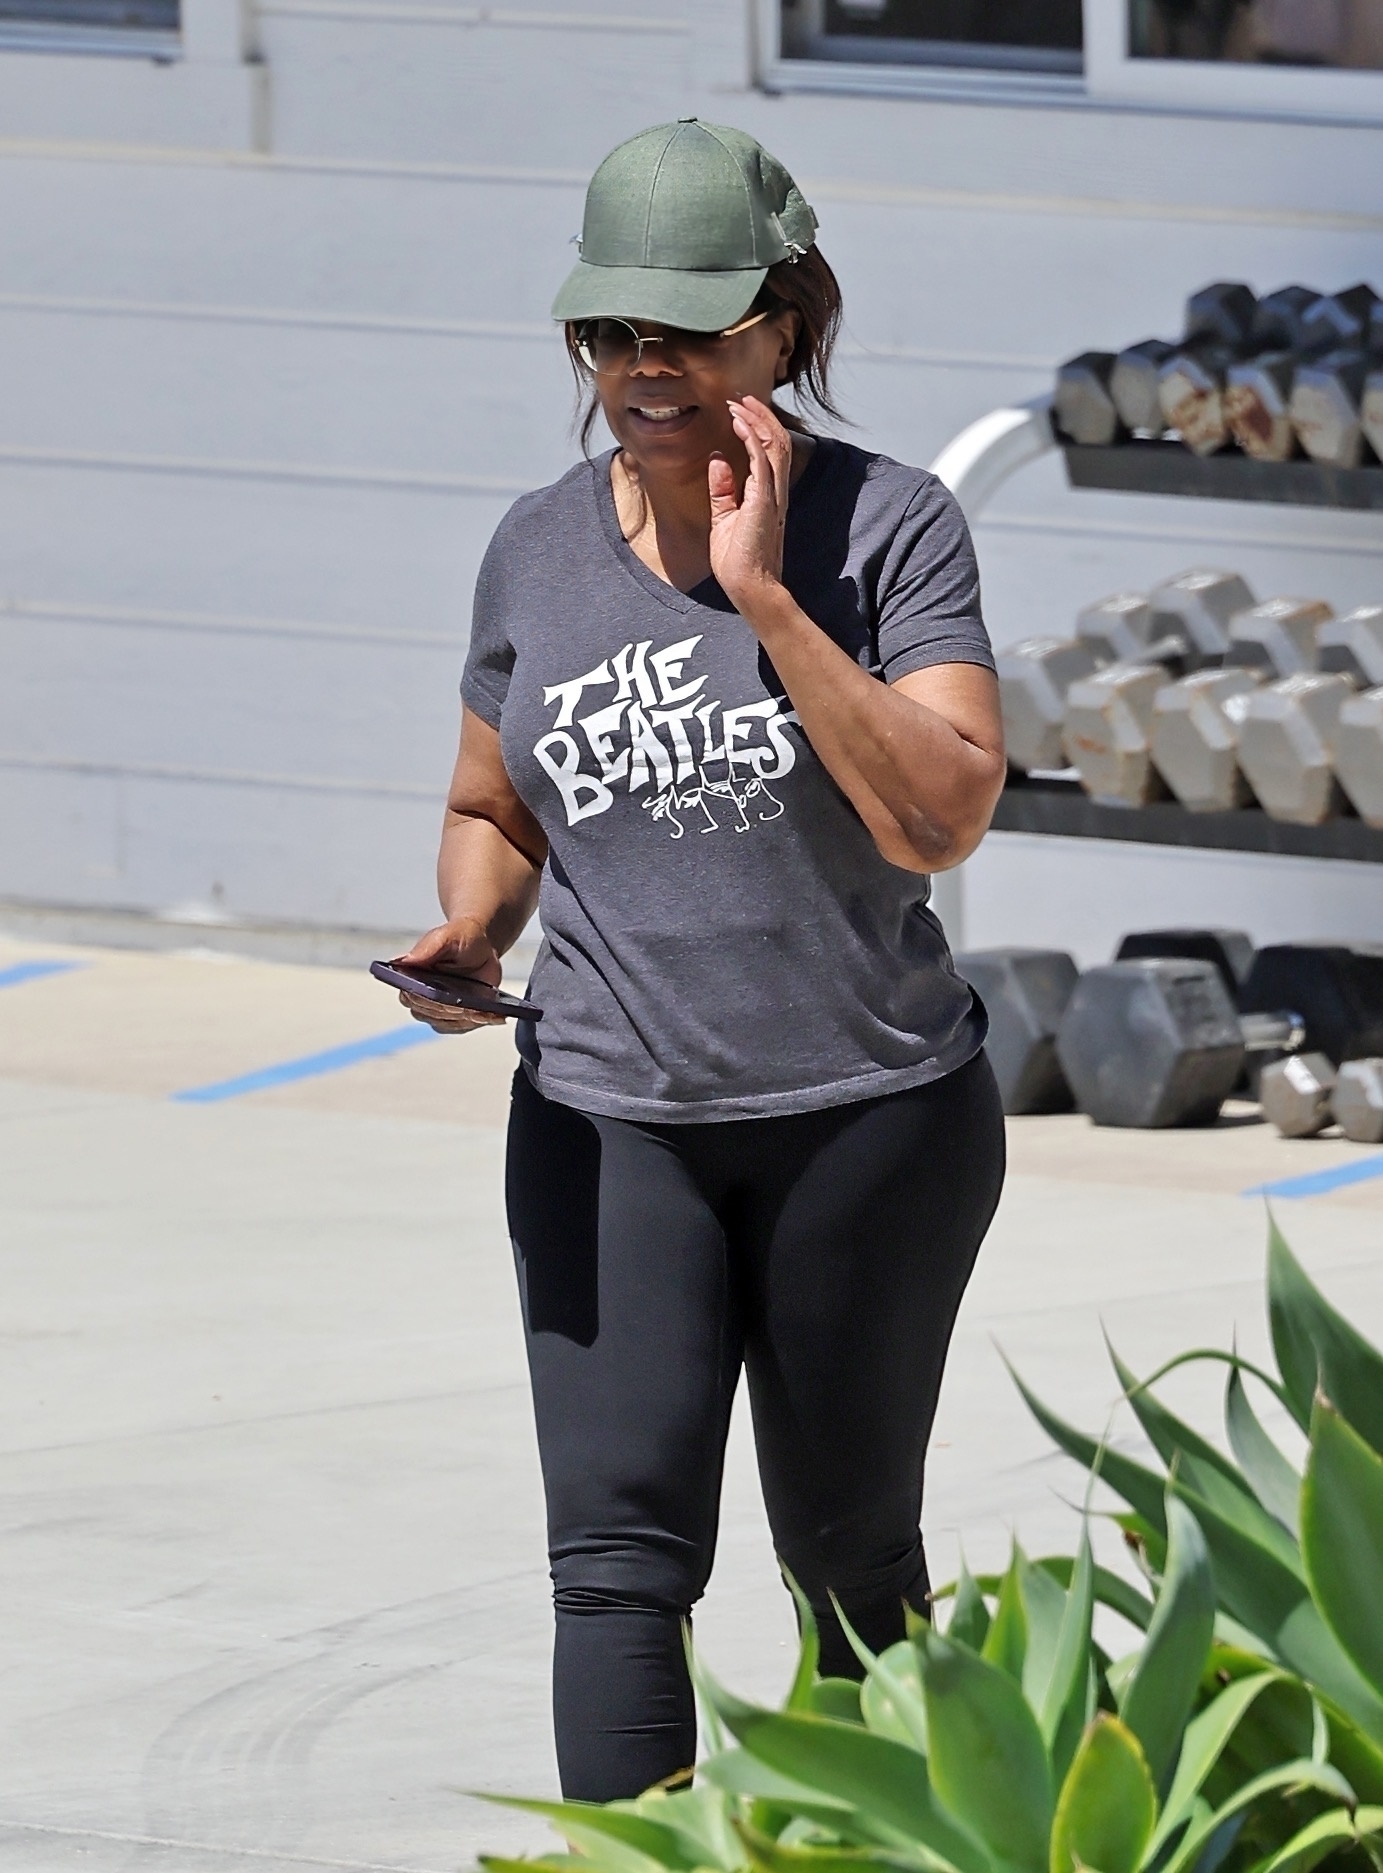 Oprah Winfrey has been hitting the gym, eating healthy, and using weight loss drugs to slim down and it shows